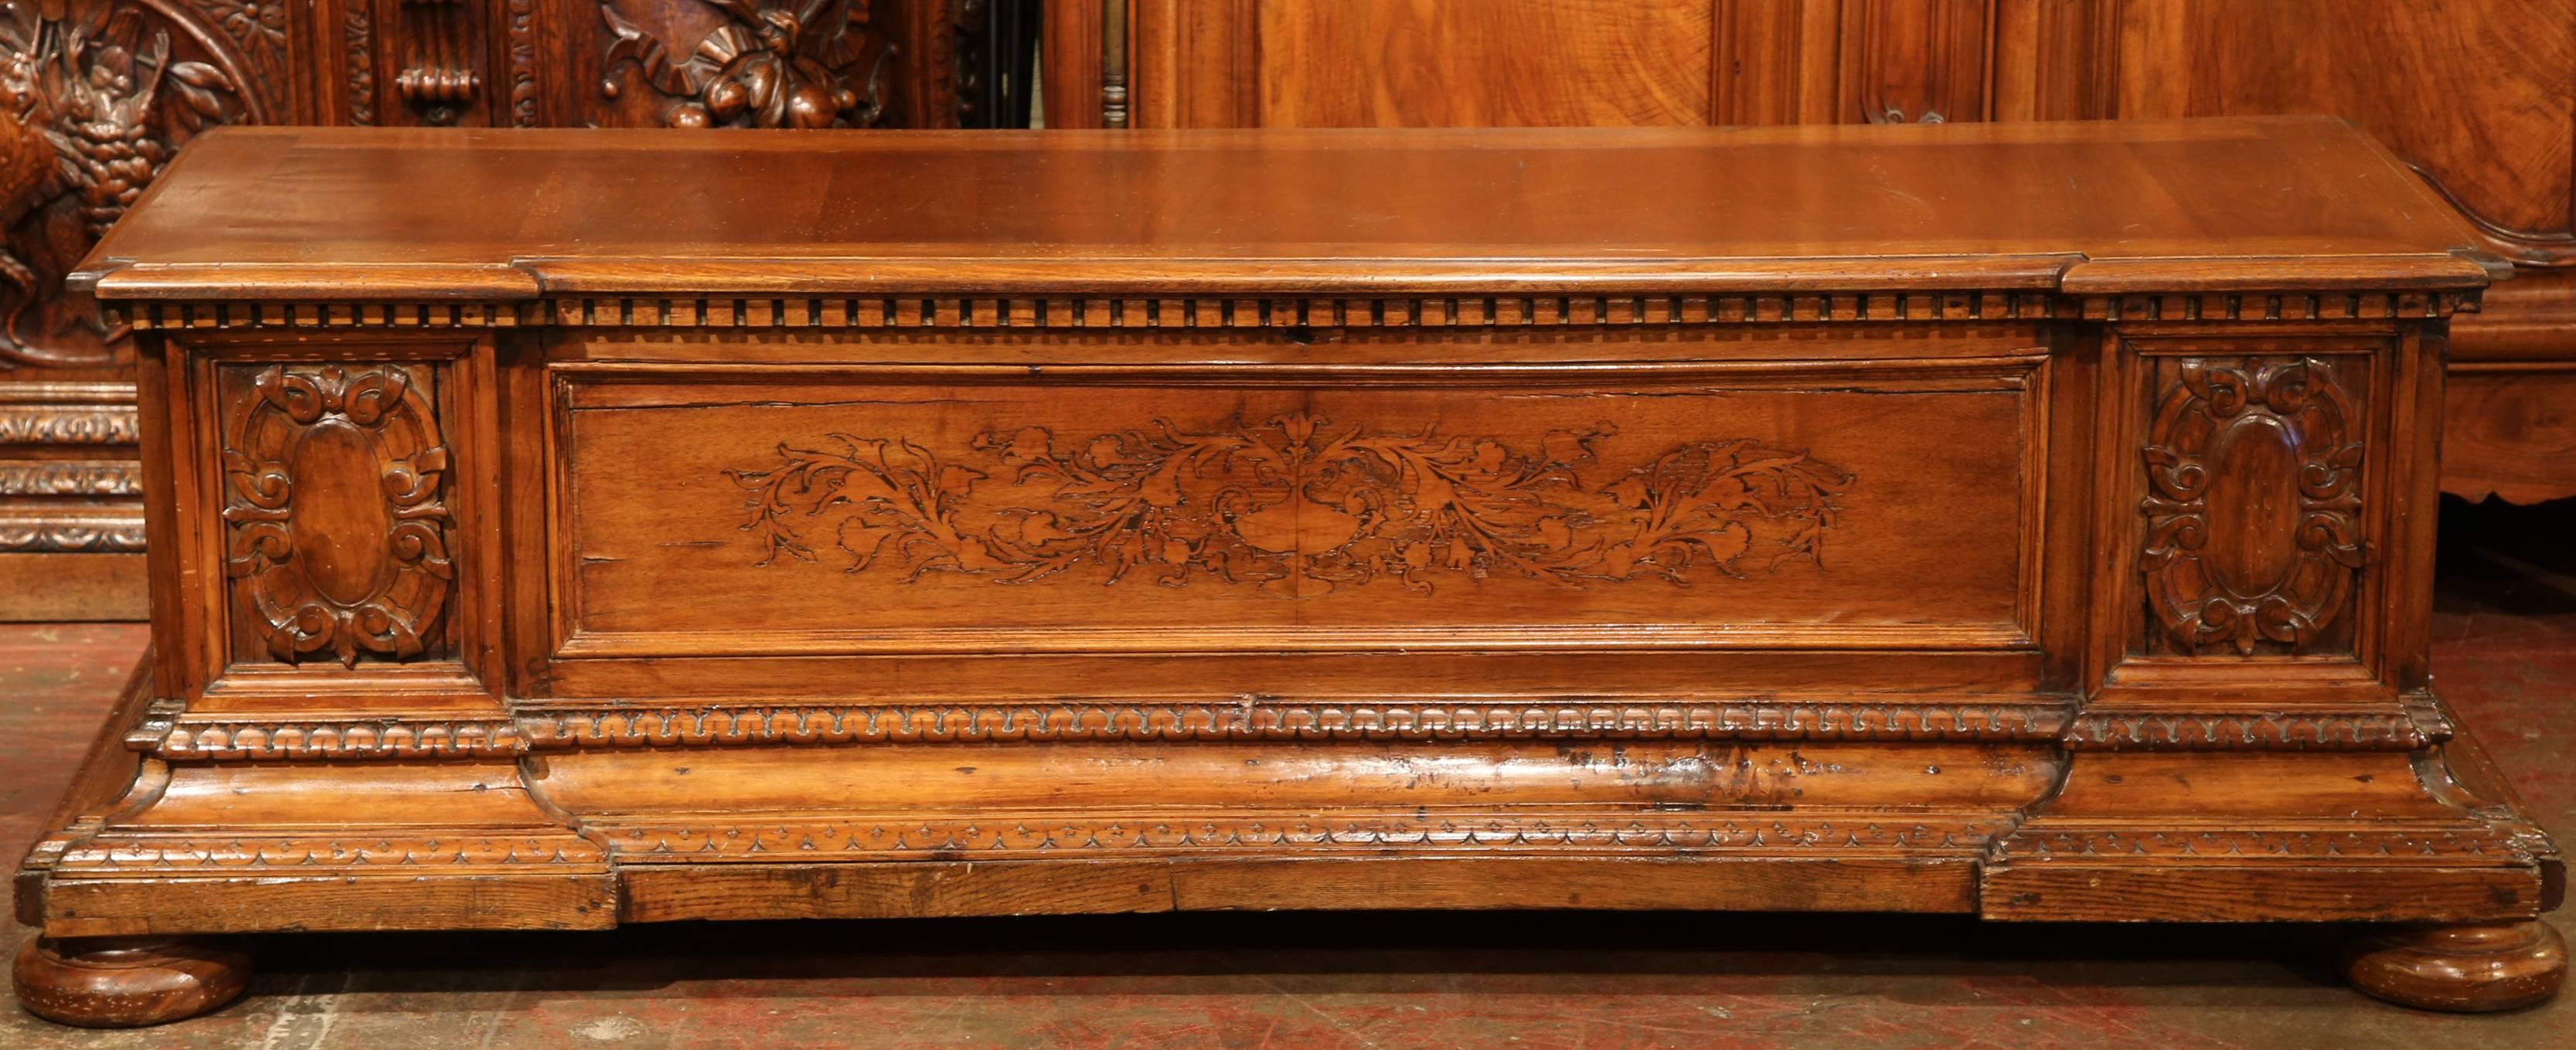 Louis XIV 19th Century French Carved Walnut Blanket Chest Trunk with Marquetry Inlay